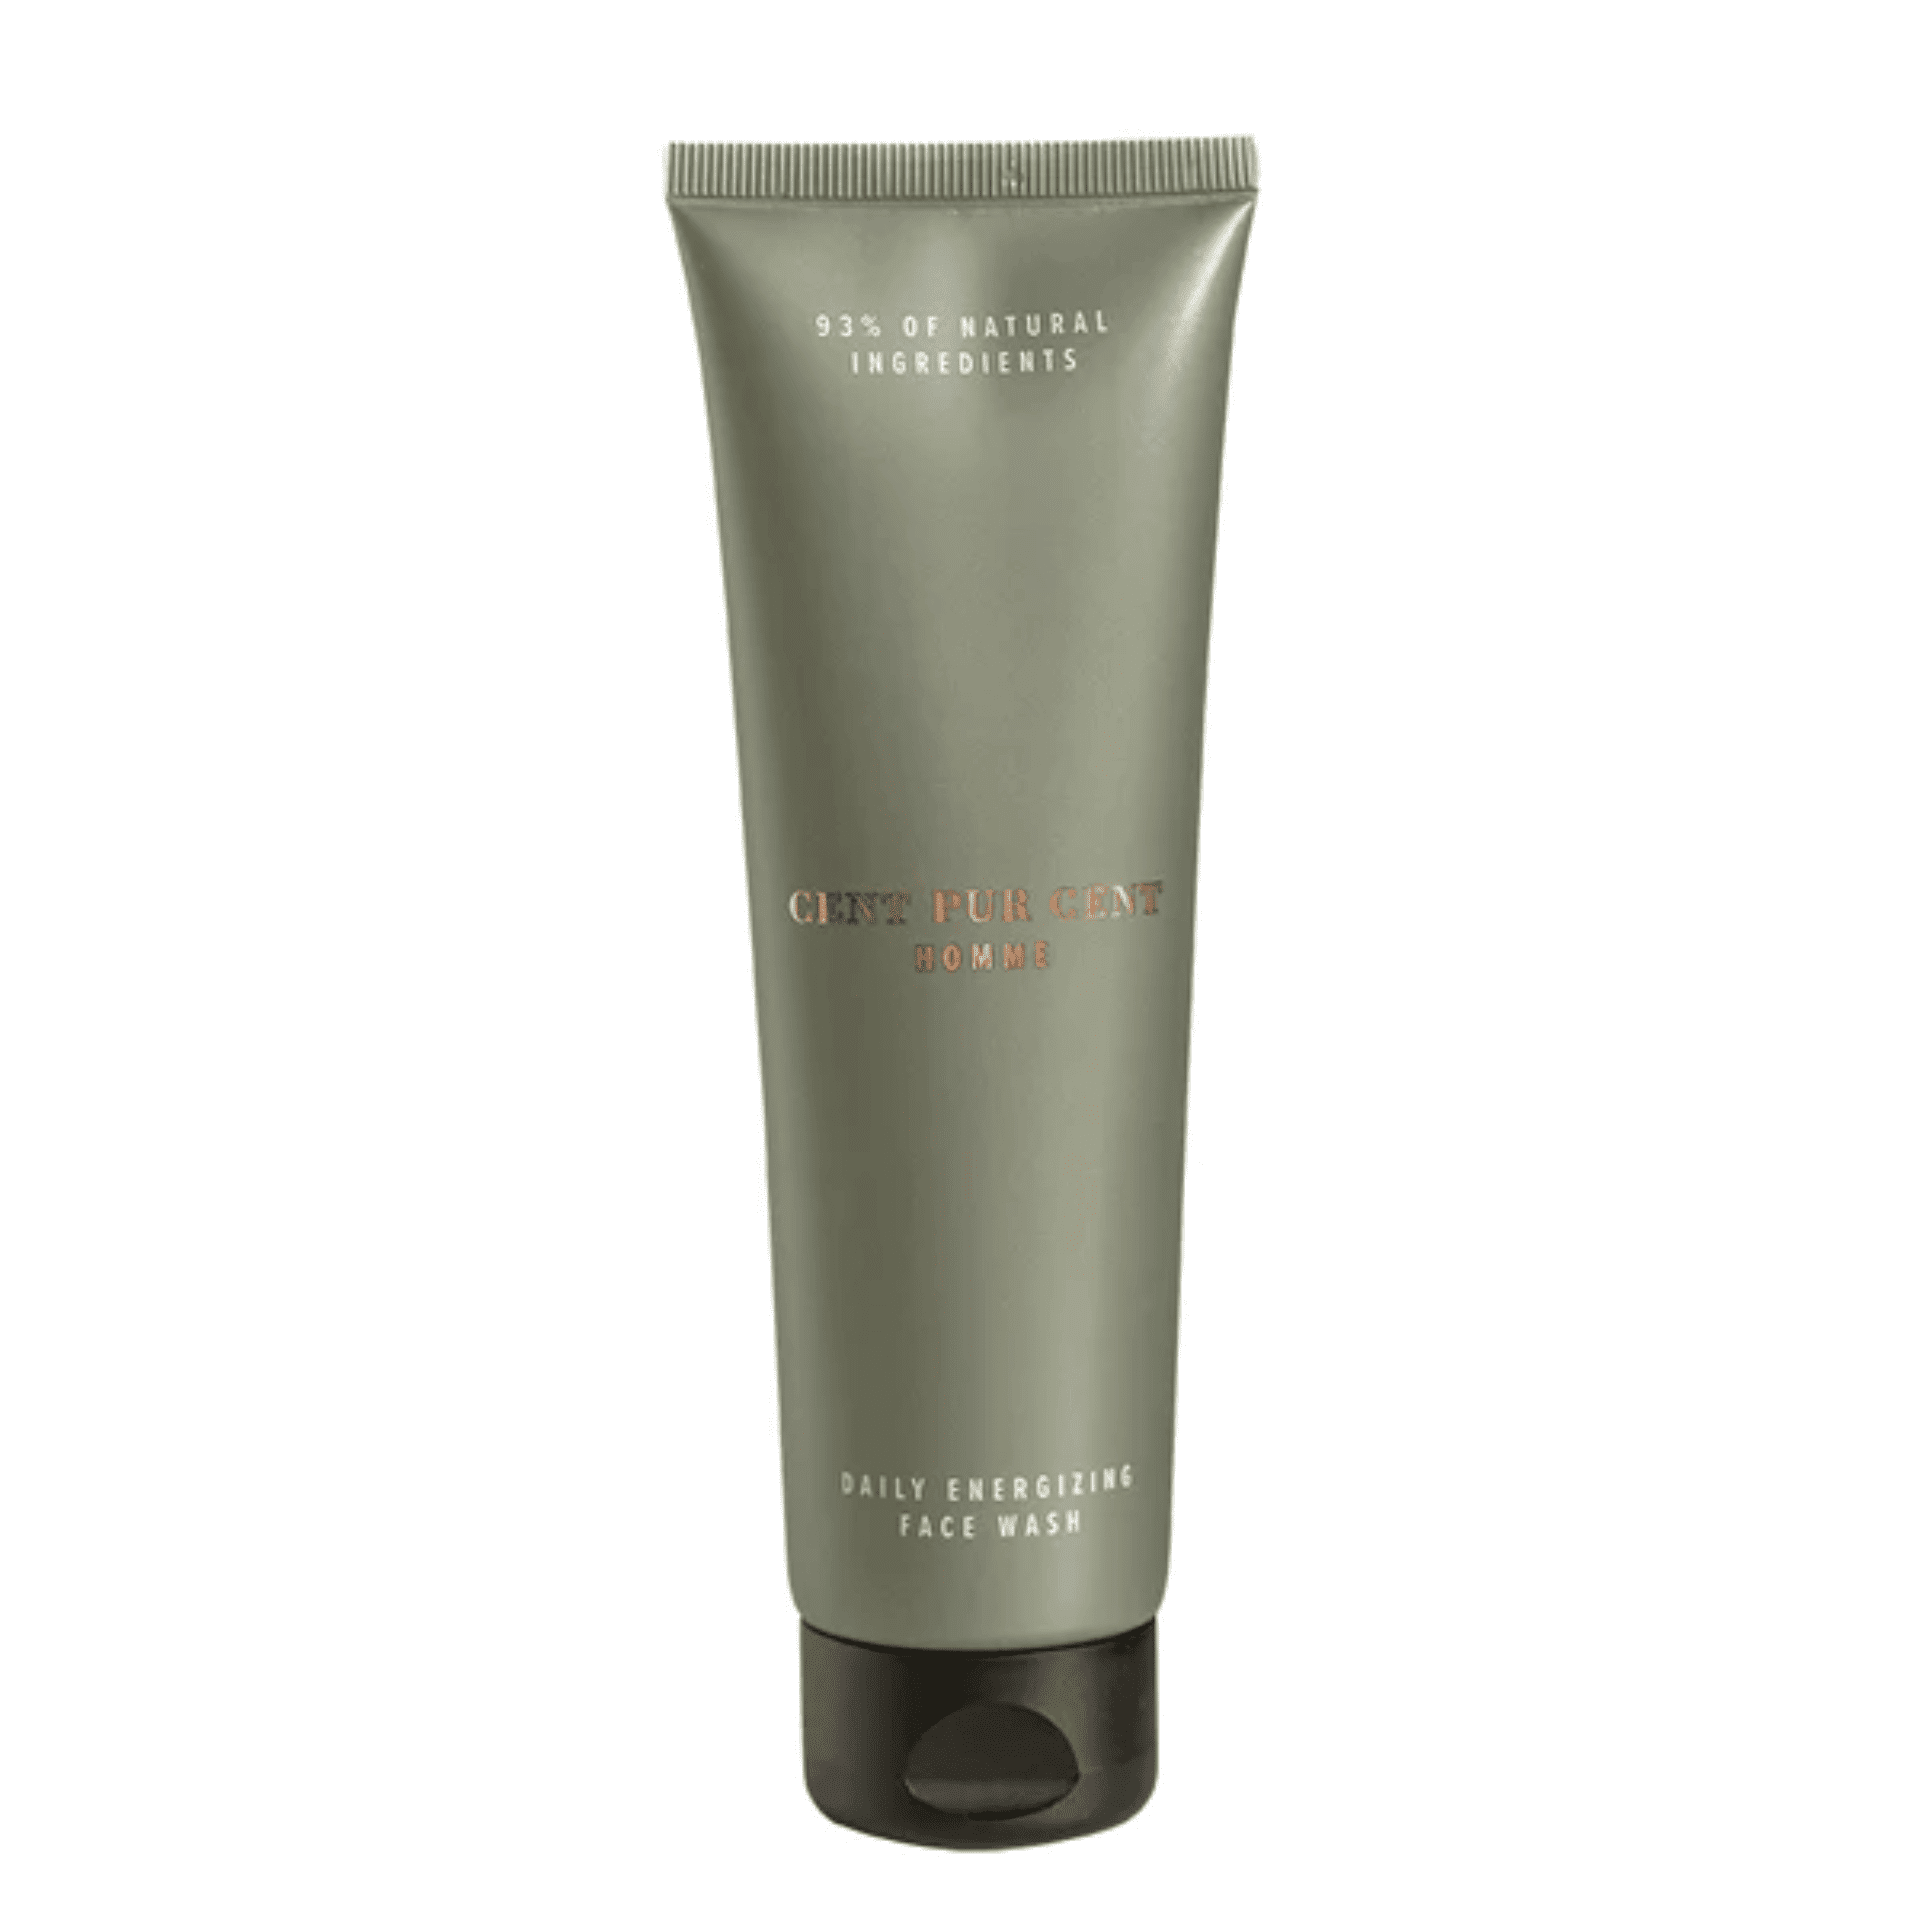 Cent Pur Cent Homme Daily Energizing Face Wash